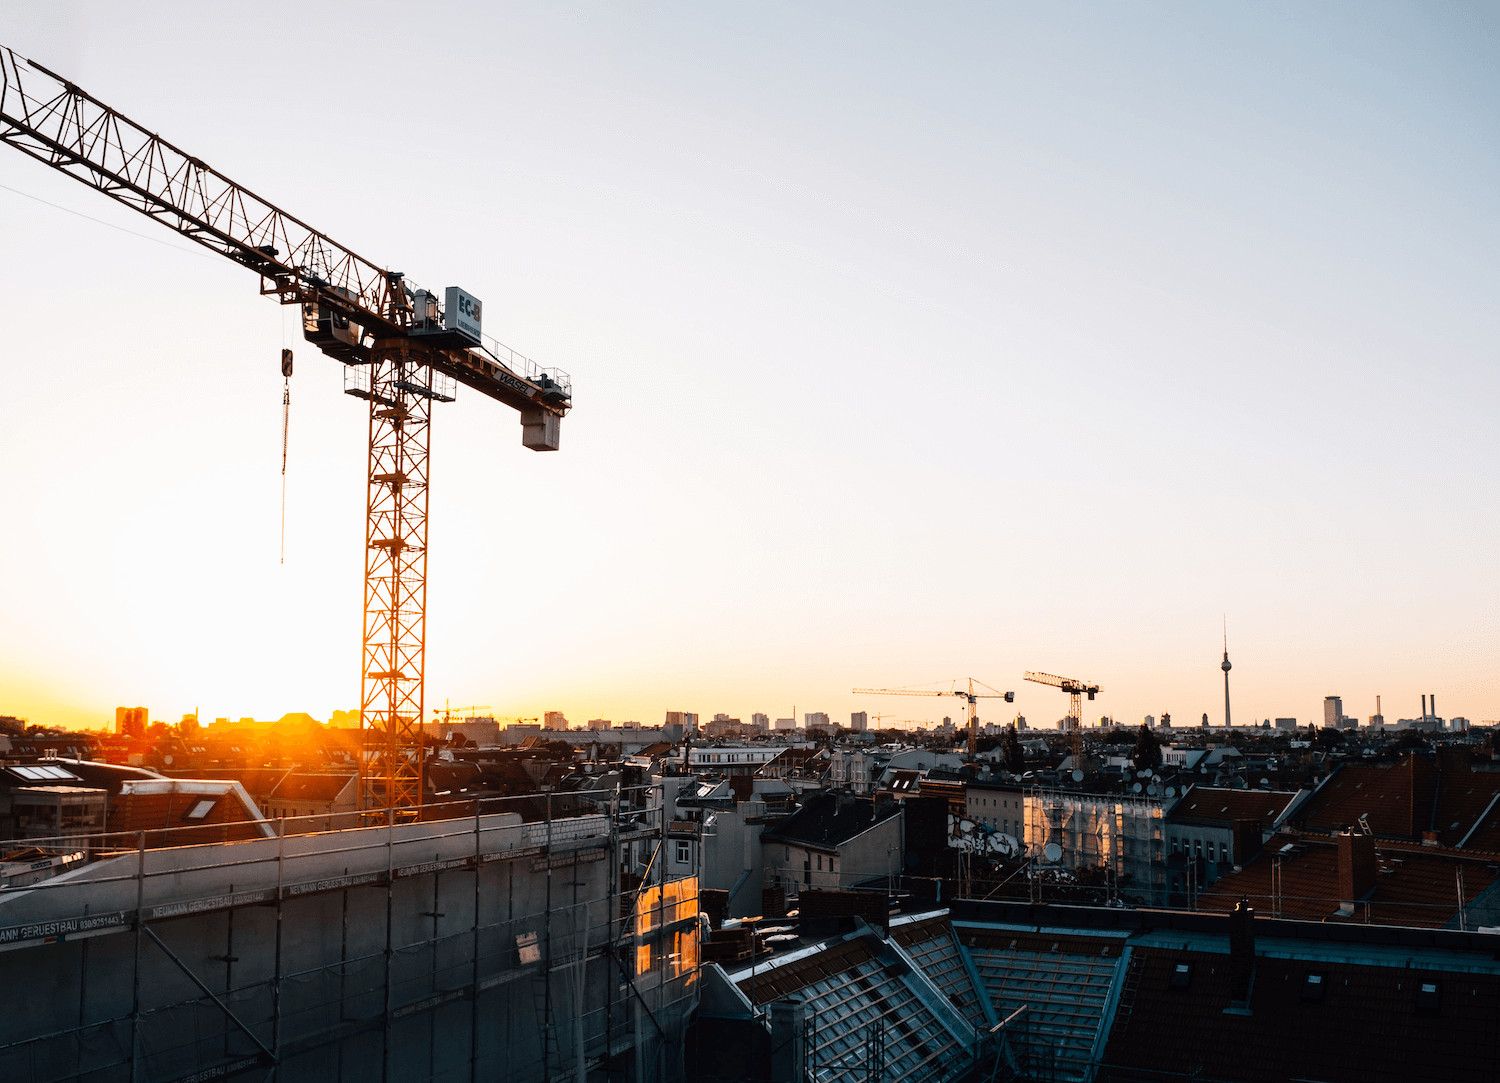 Cityscape at sunrise, featuring construction cranes and rooftops of buildings. The sky is clear with warm sunlight casting a glow over the urban area, highlighting a crane prominently to the left and the skyline in the background. It's a scene that underscores the importance of insurance for builders.